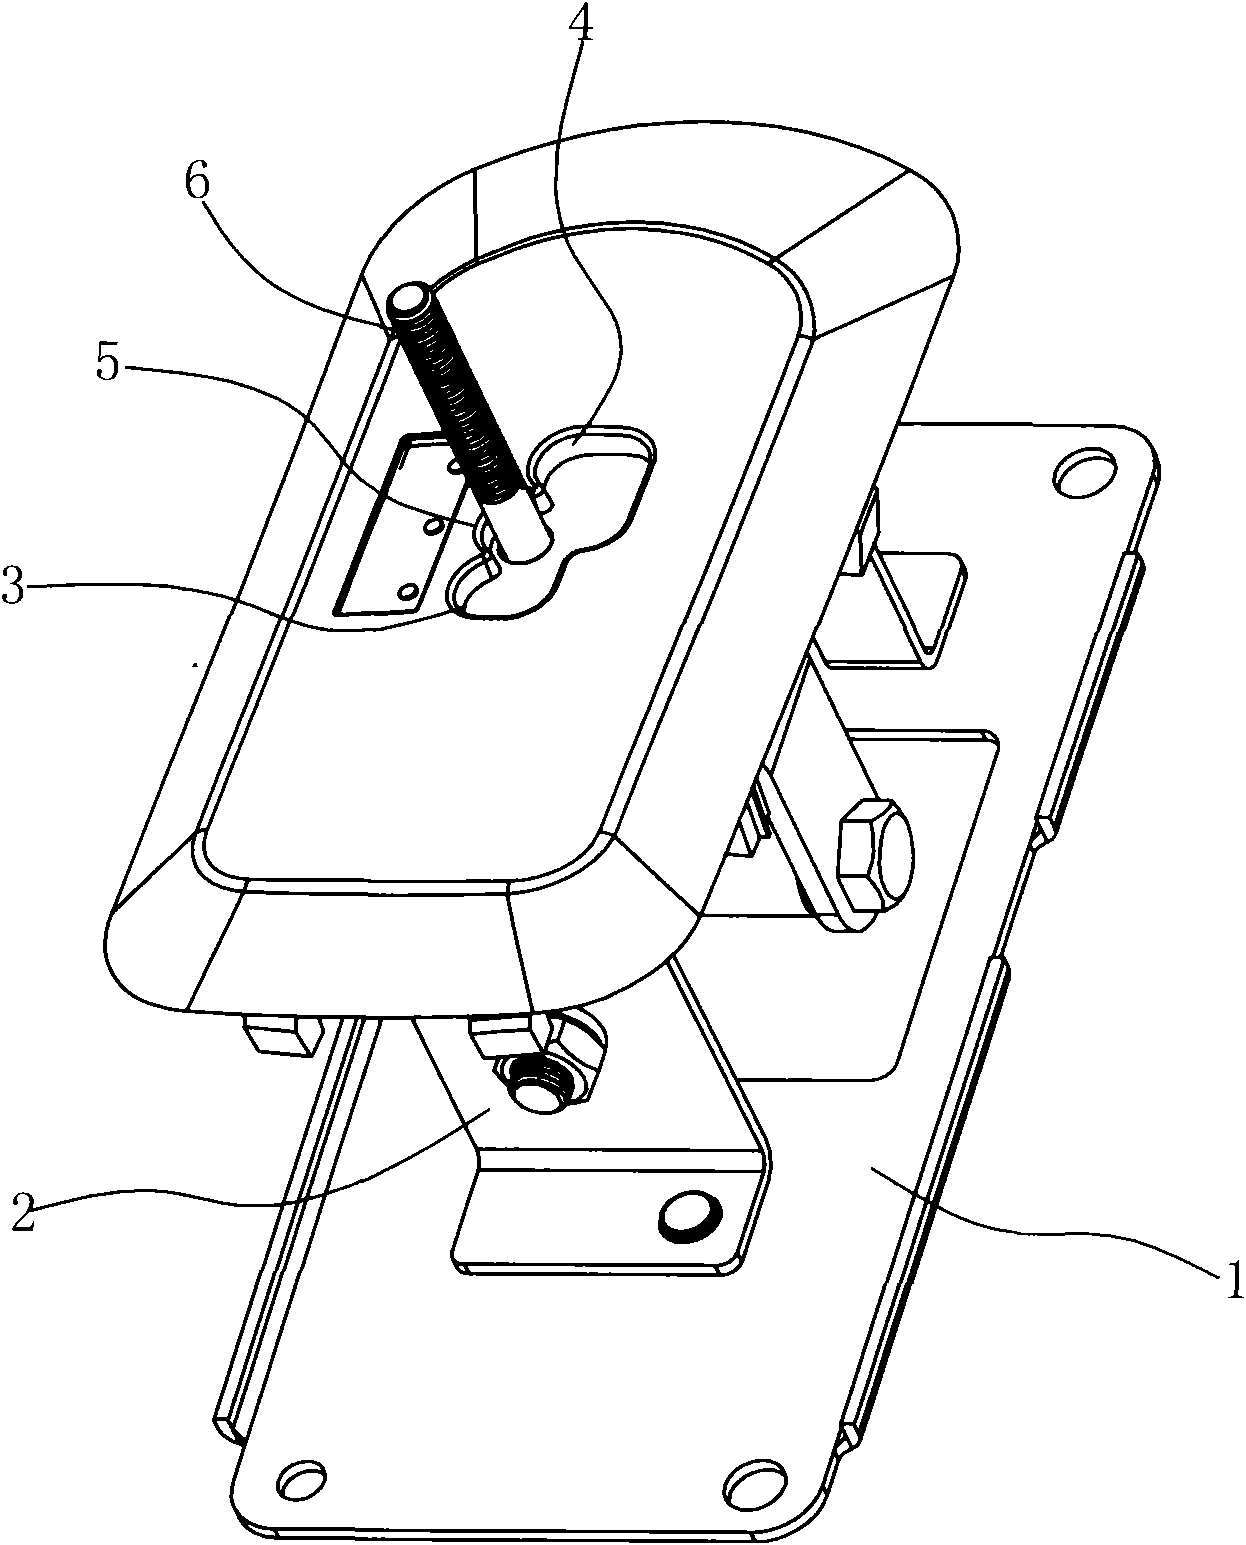 Electronic gear shifting mechanism of electric automobile